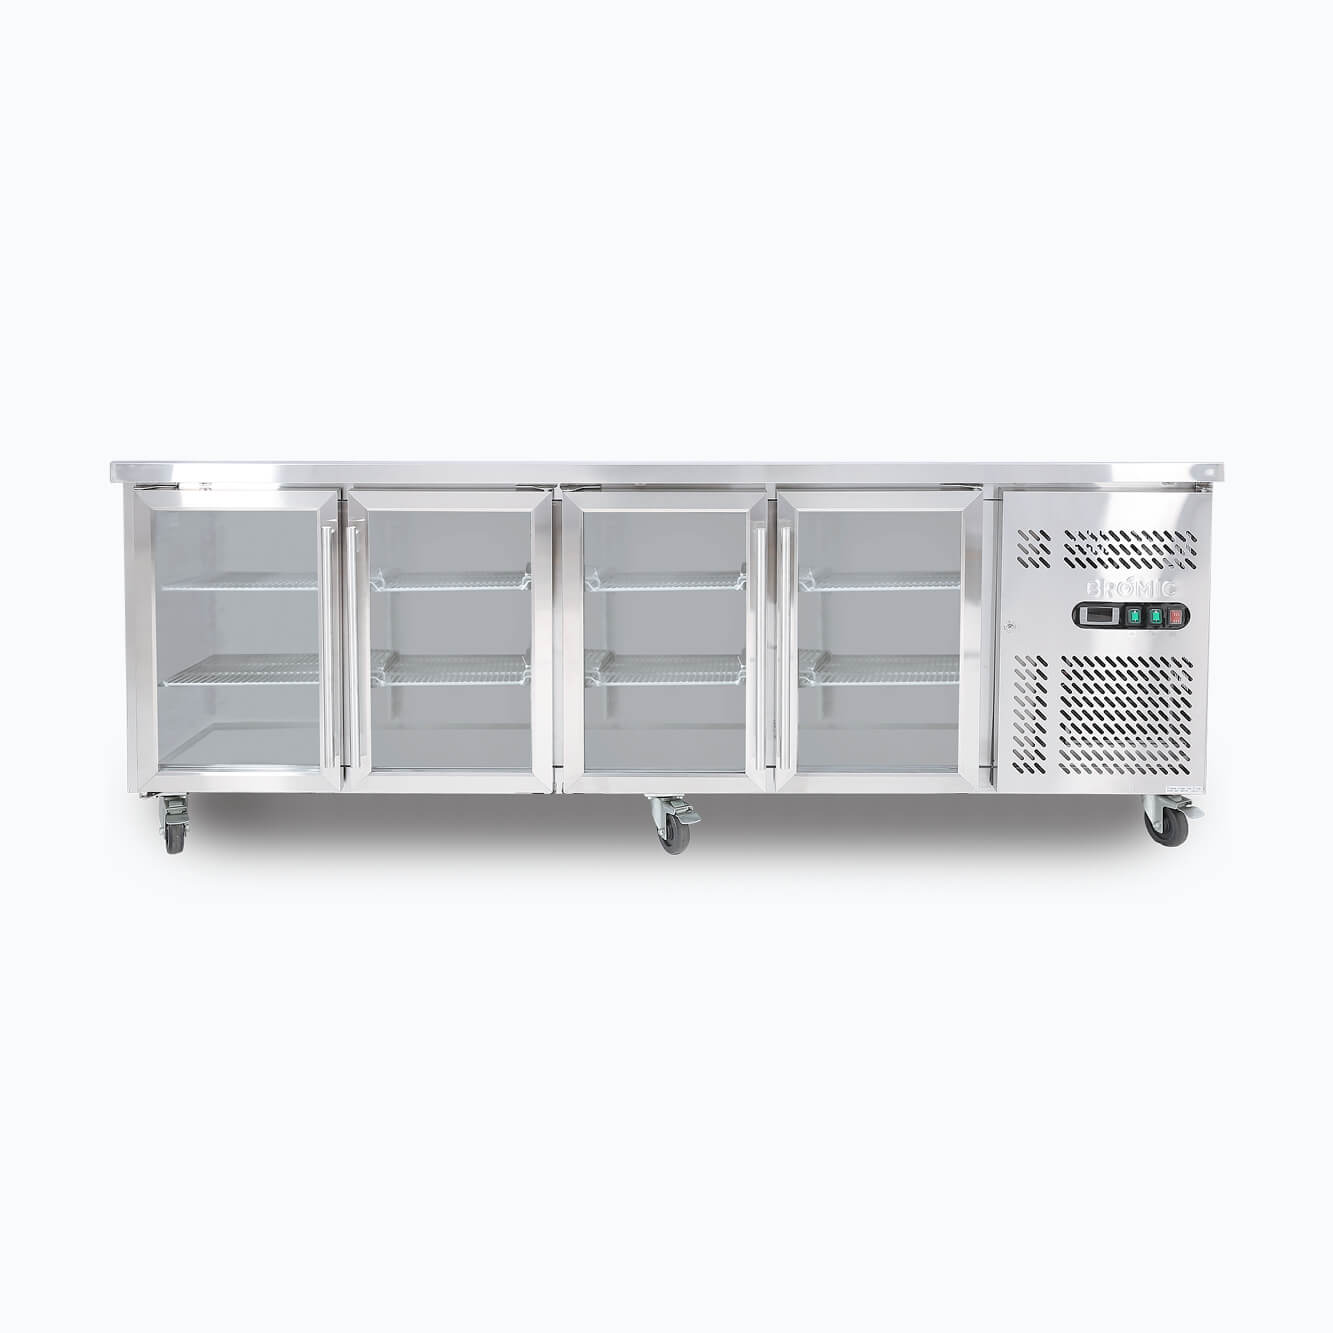 Image of a 553L stainless steel under bench display fridge with four hinged doors, front view.